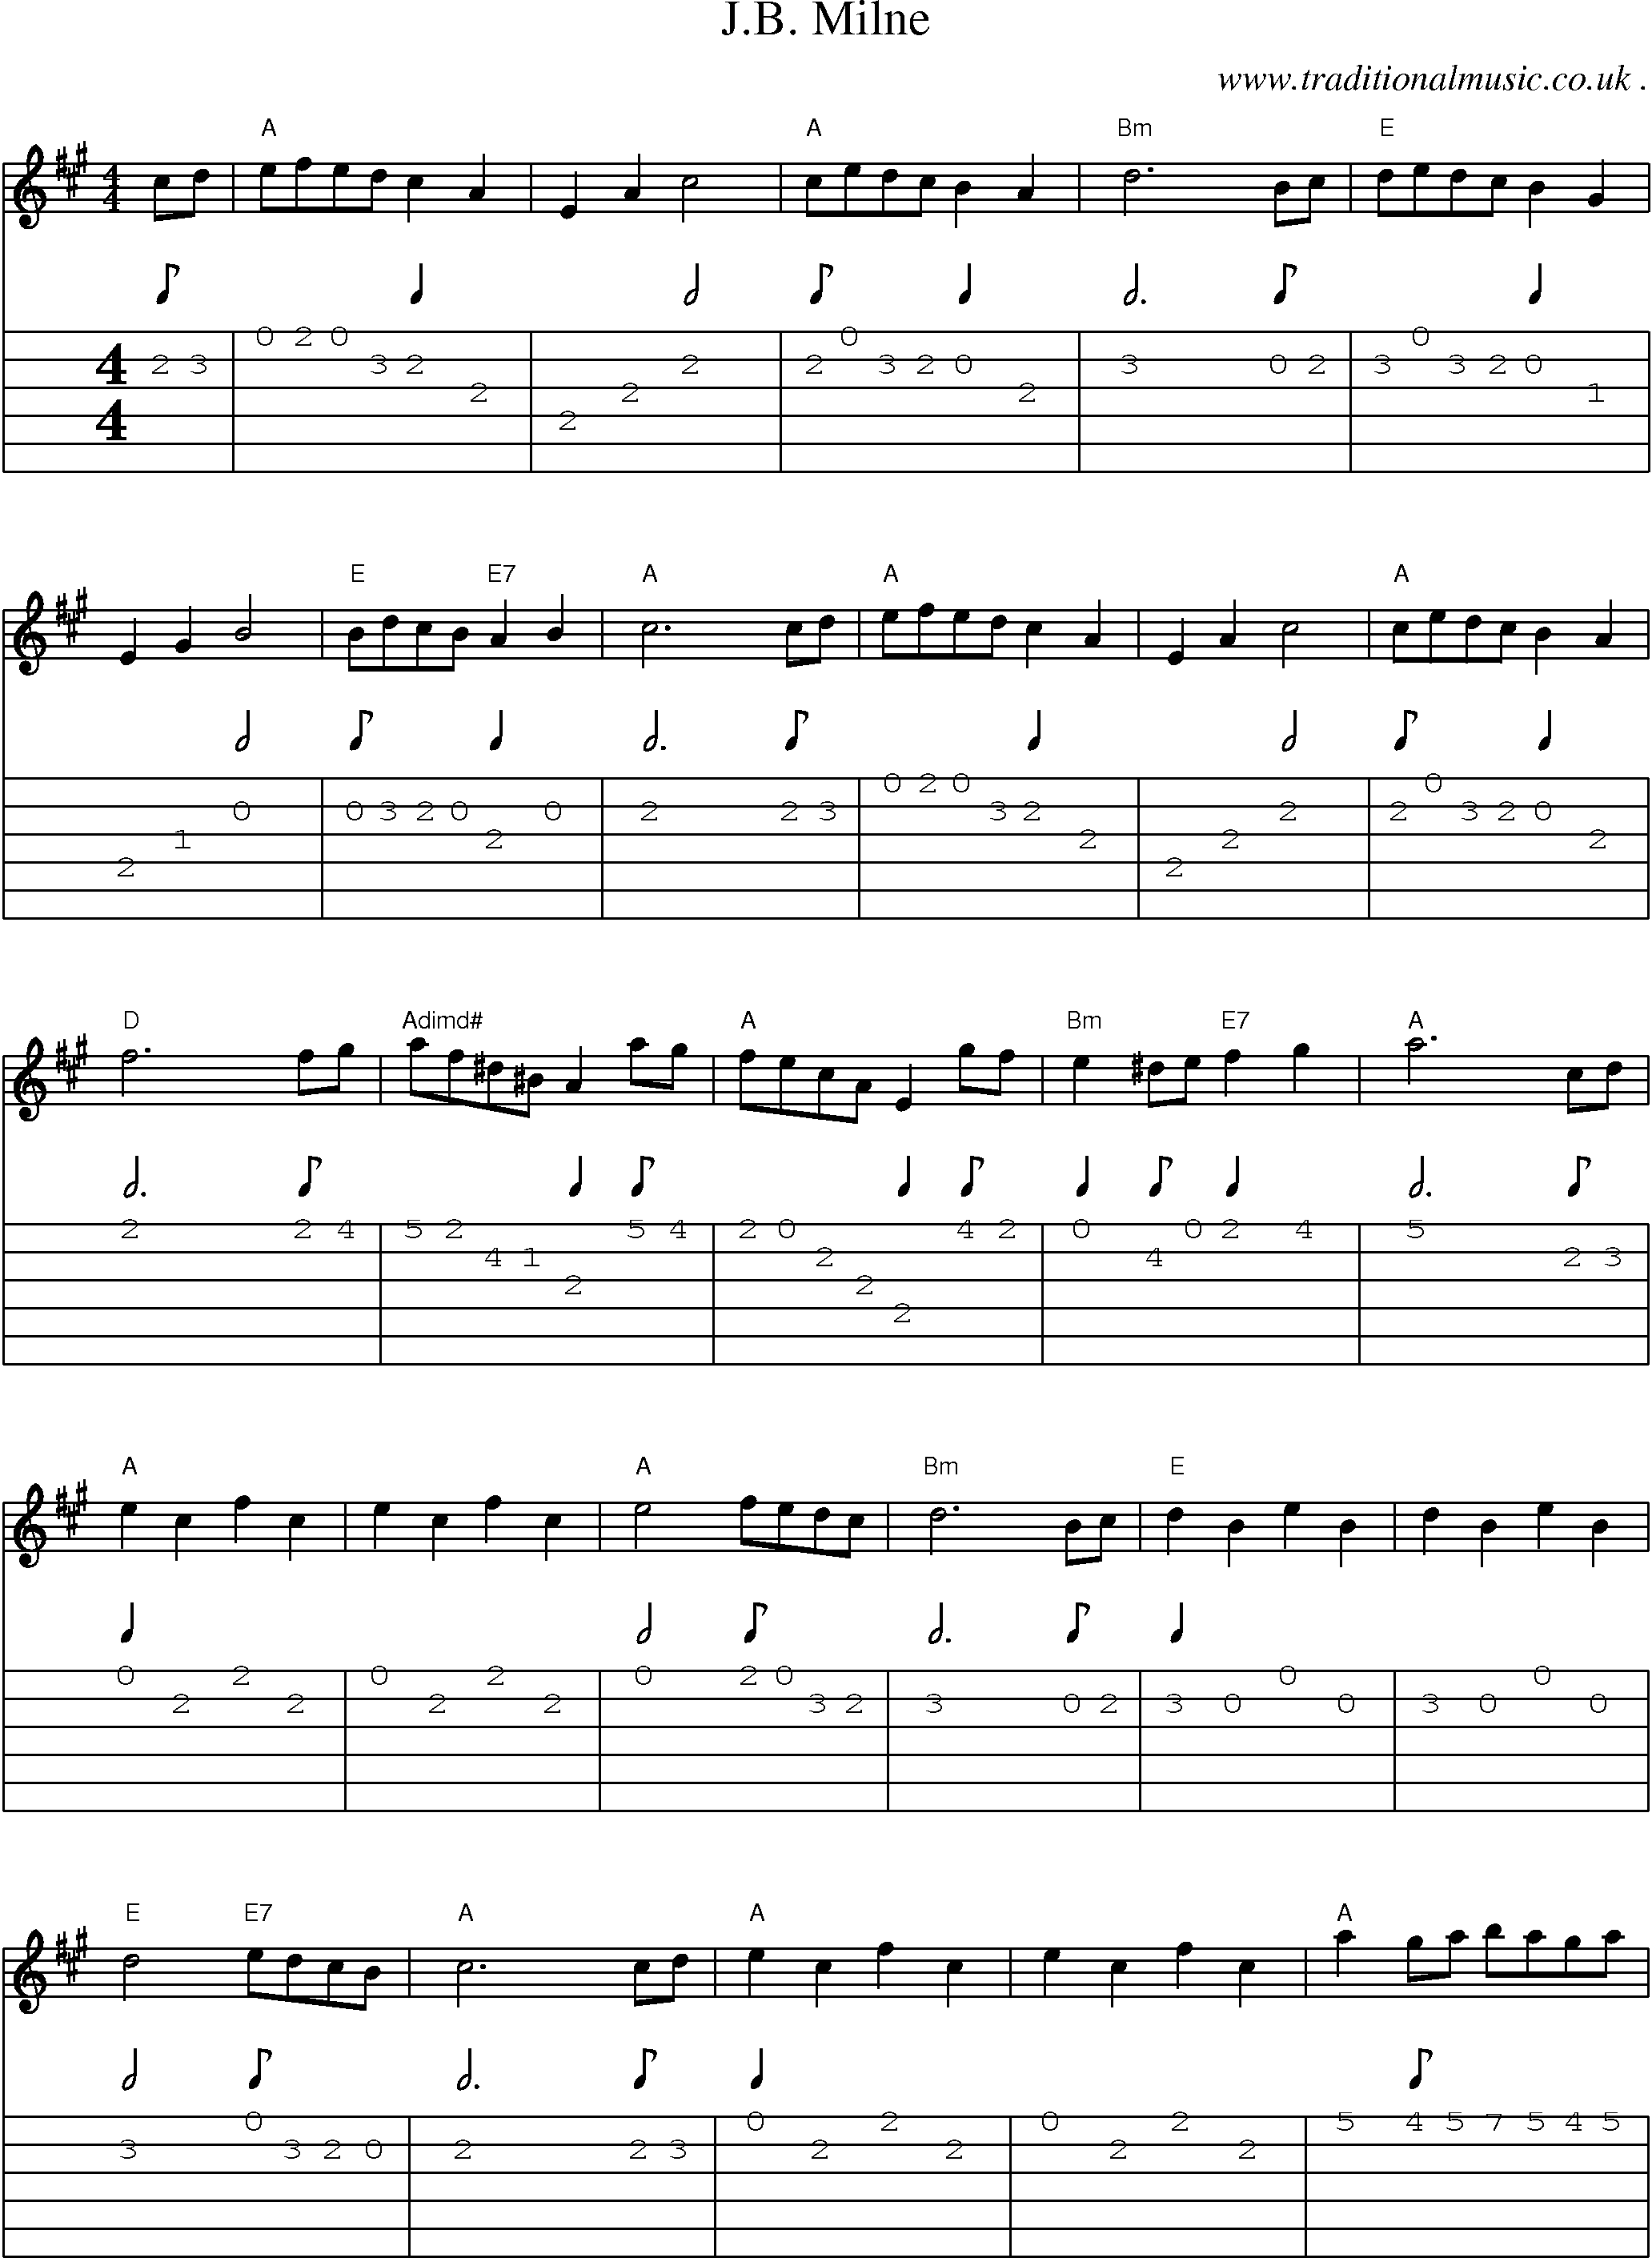 Sheet-Music and Guitar Tabs for Jb Milne